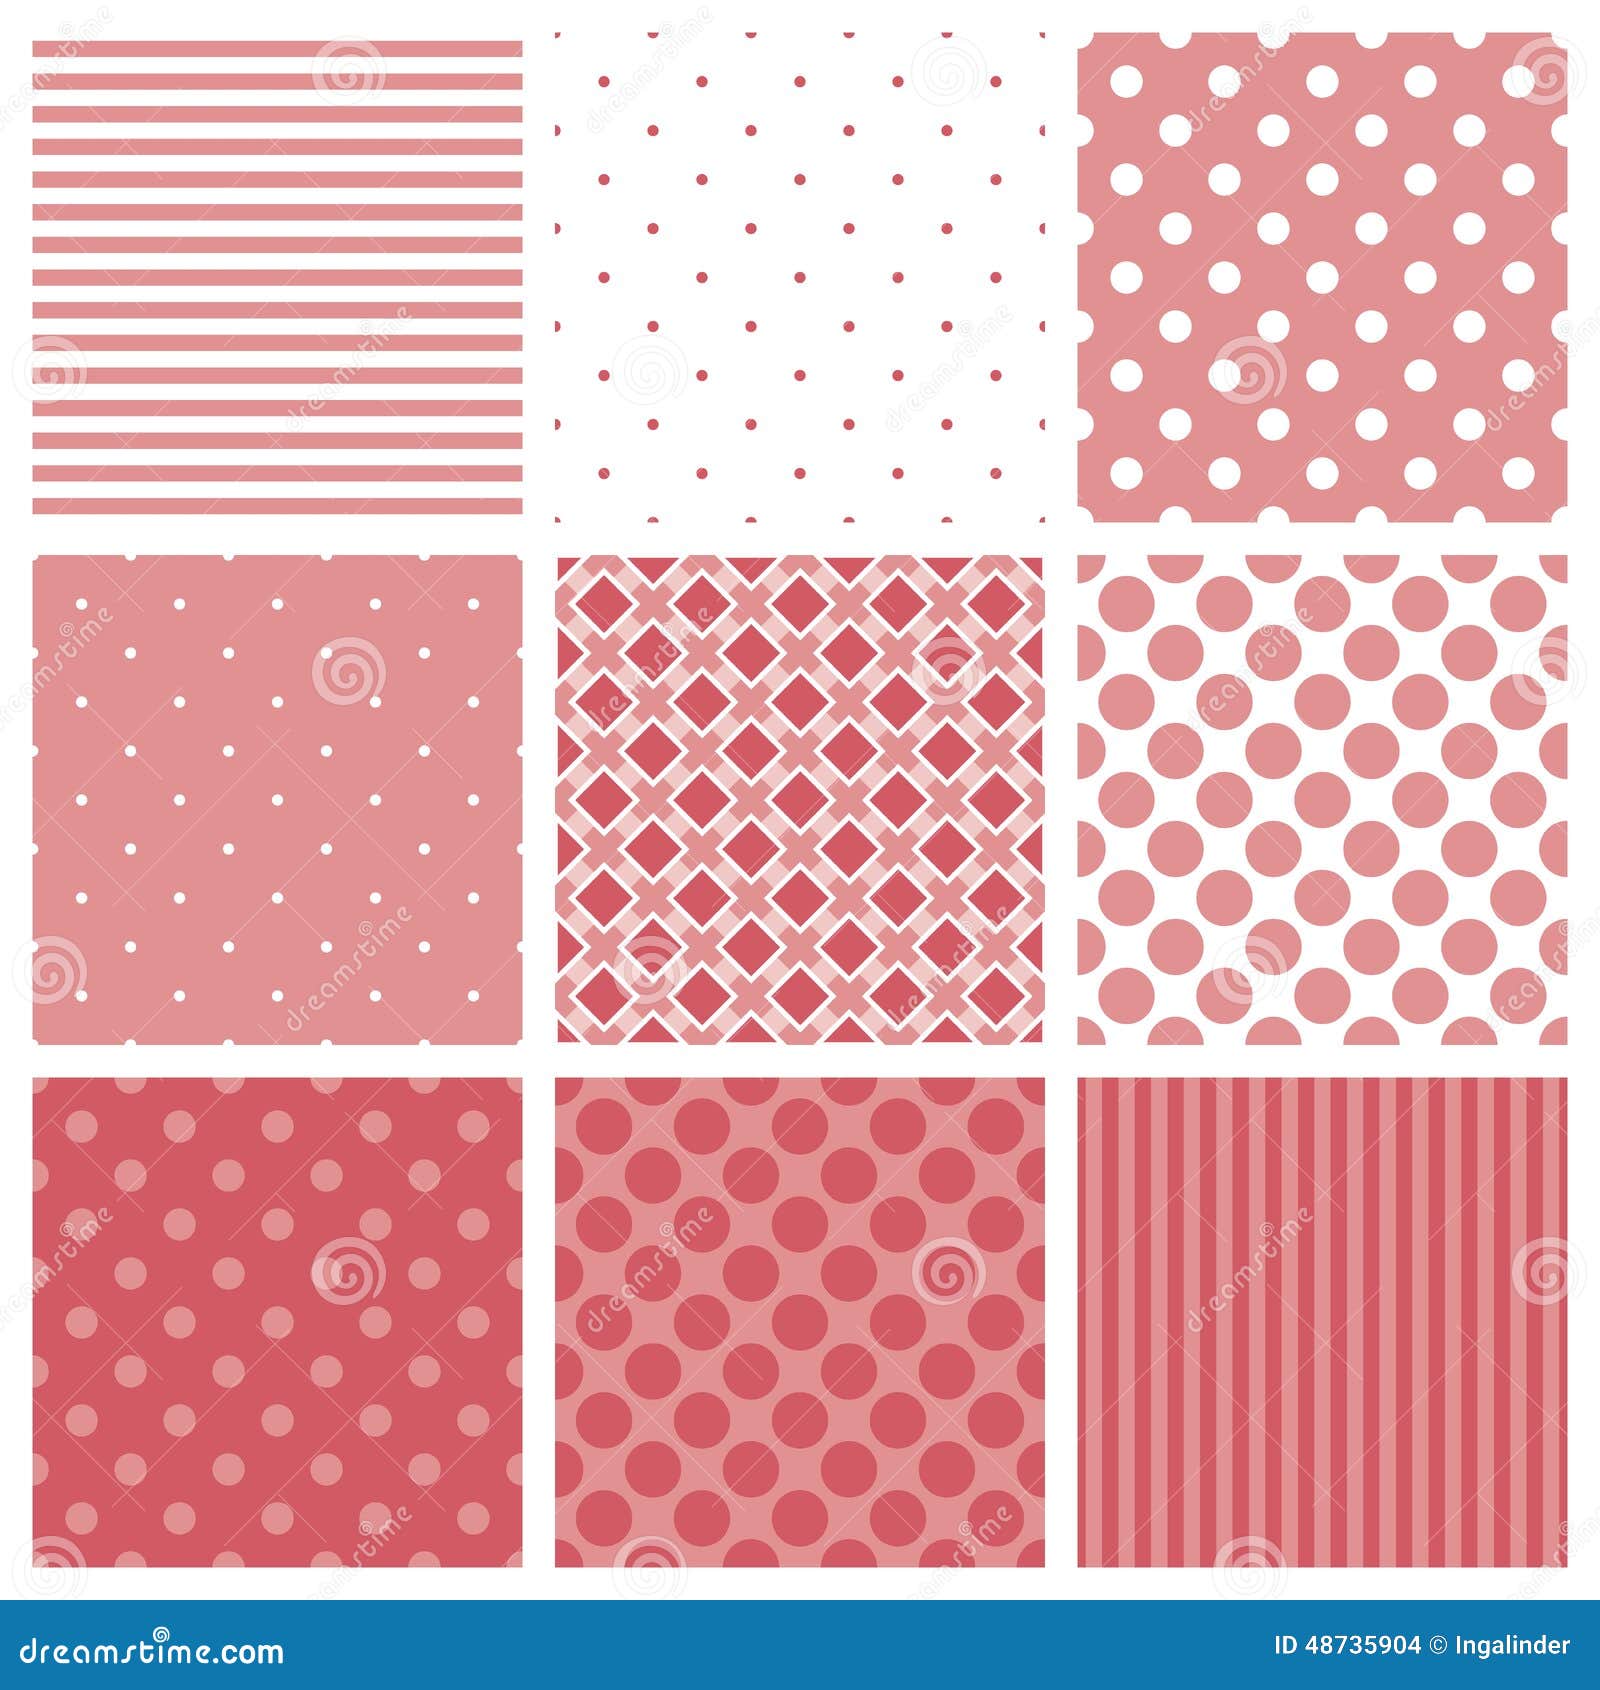 tile  pattern set with pink and white plaid, stripes and polka dots background